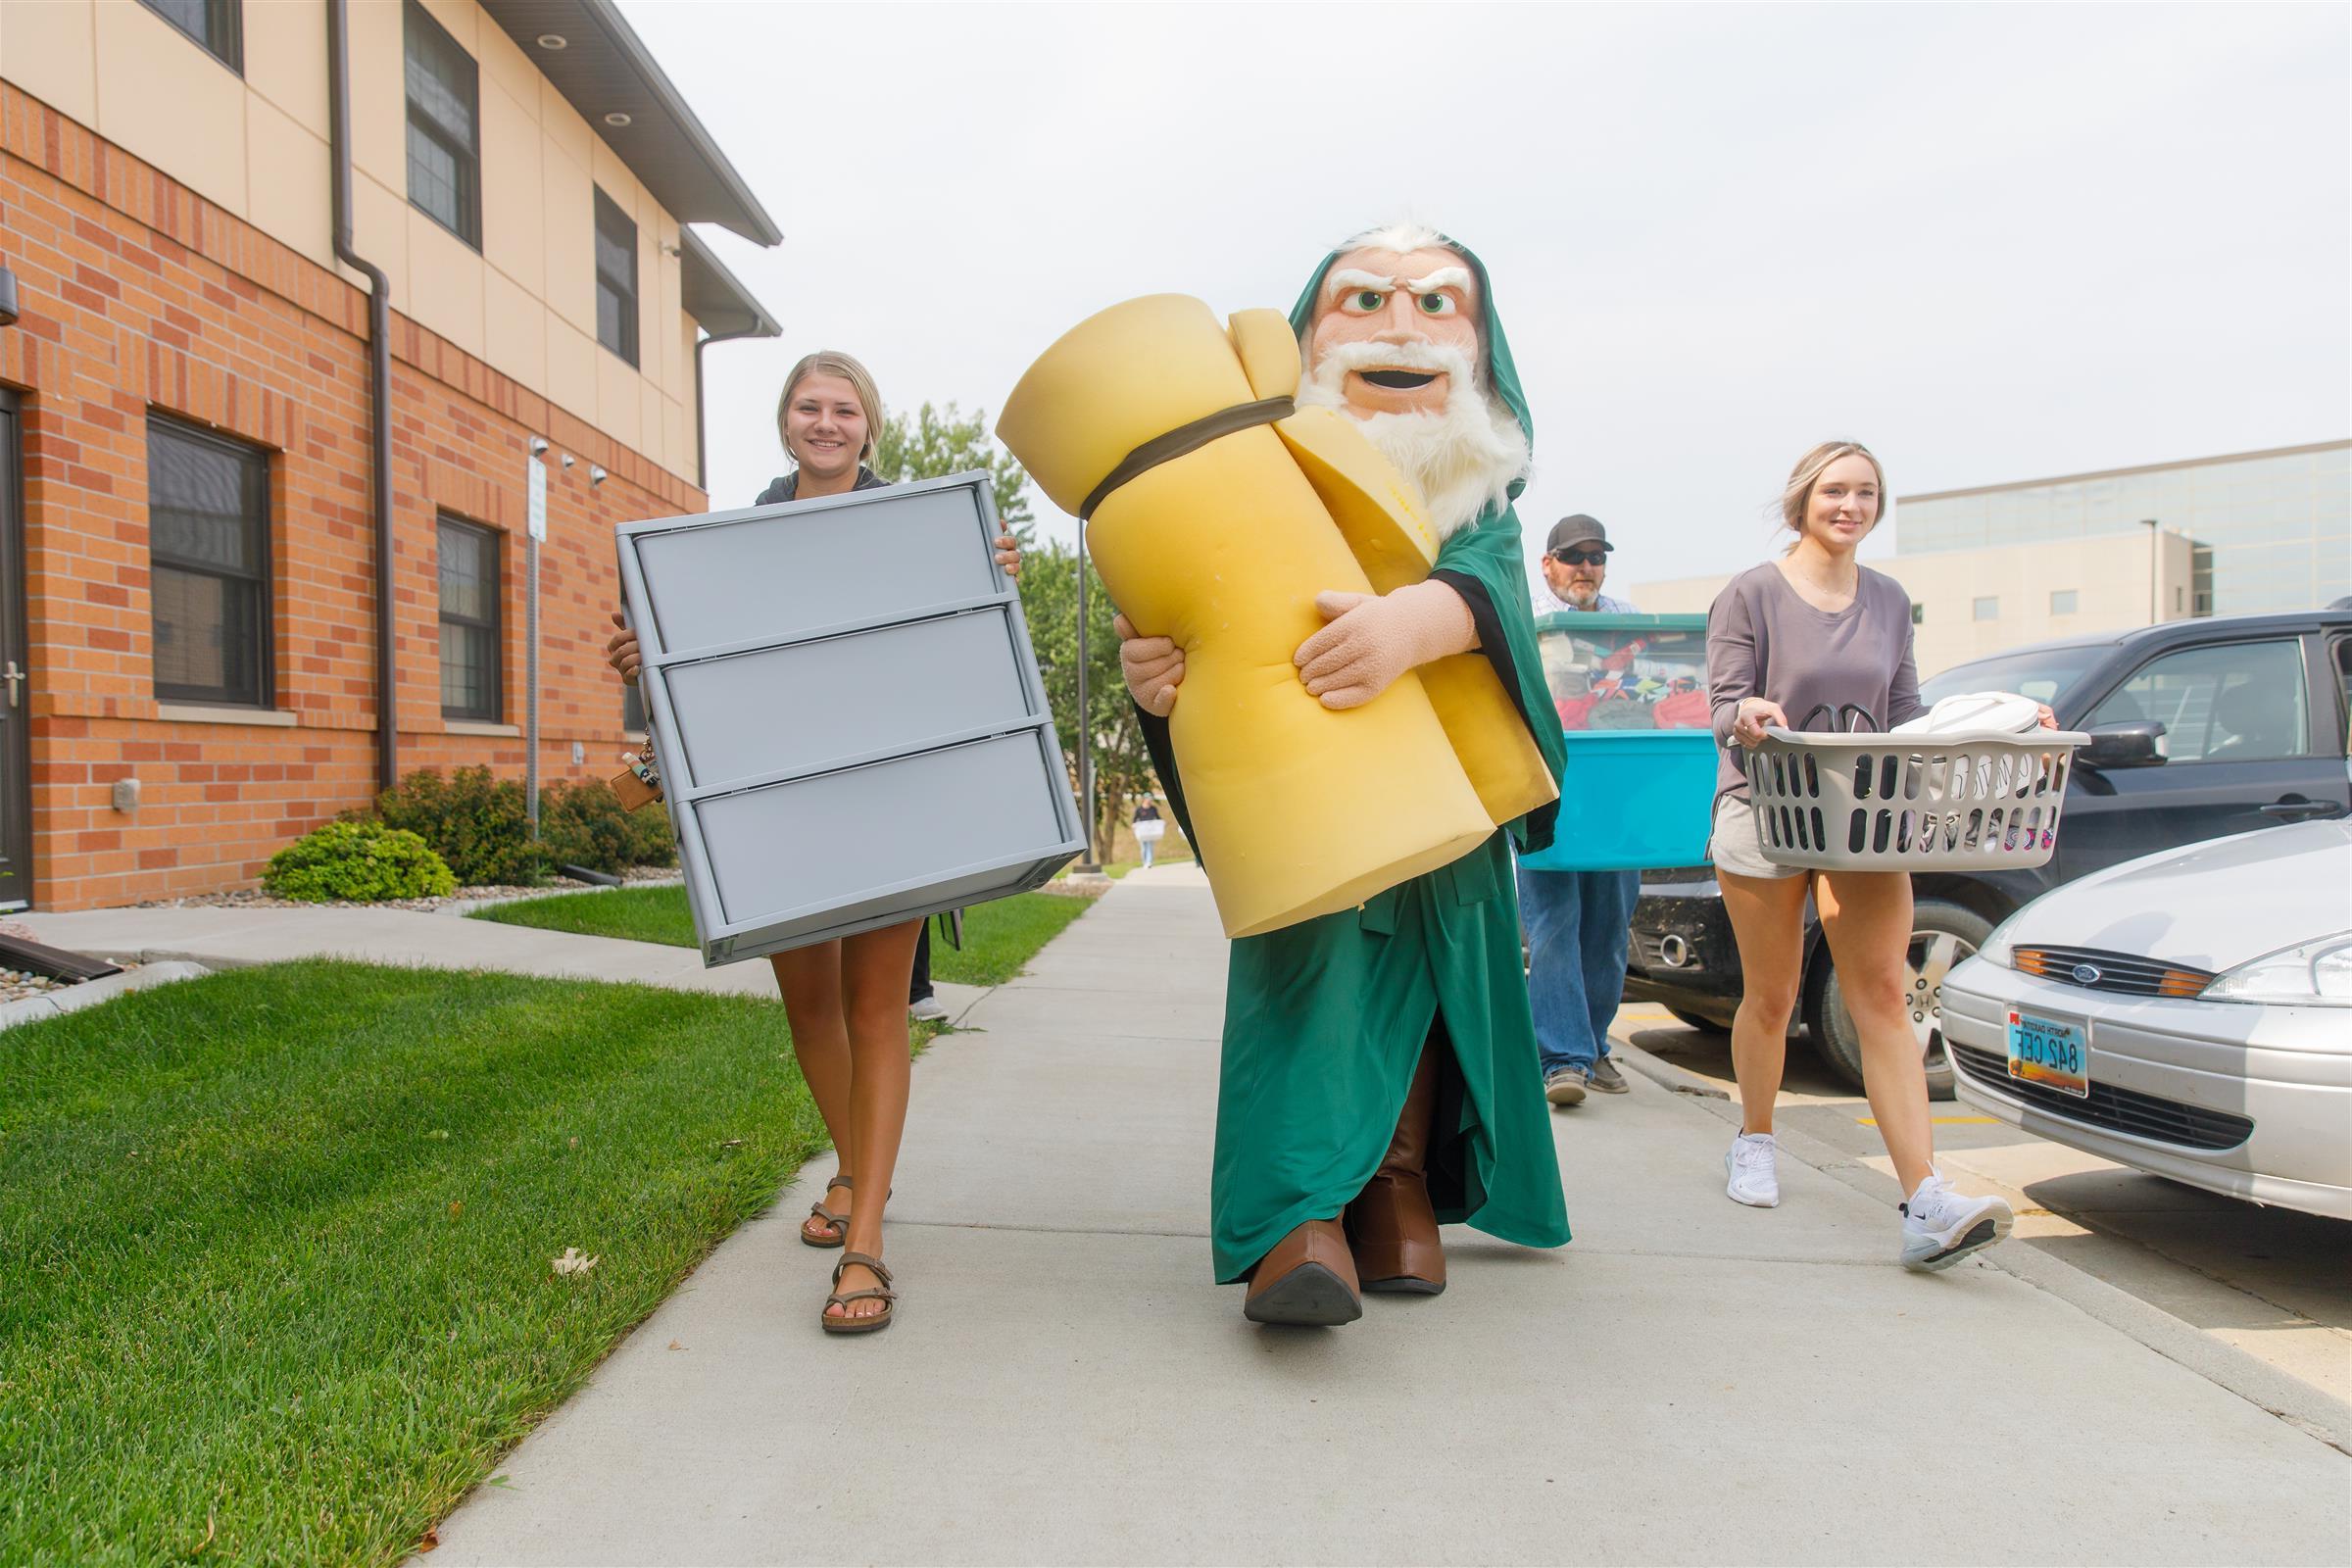 Merlin the Mystic Mascot is helping 2 smiling female students move in to the residence hall